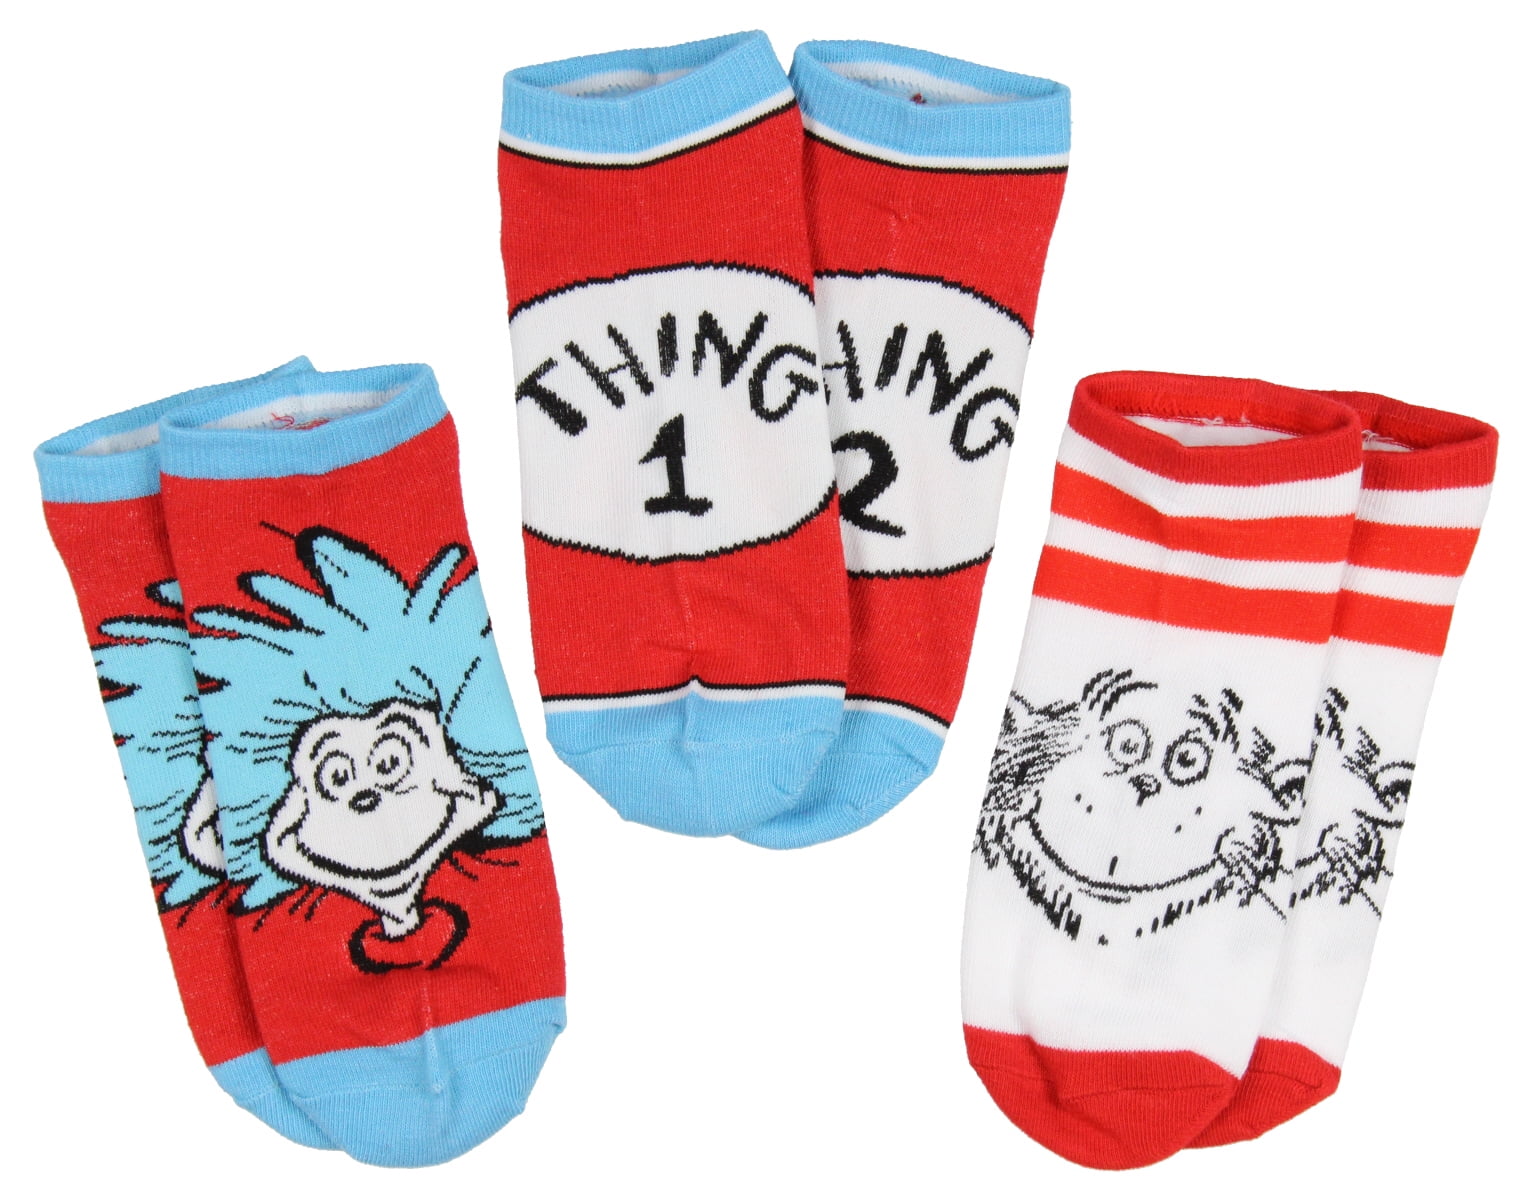 Dr Ages 5-8 Seuss Slippers Cat in The Hat//Thing 1 and 2 Kids Slipper Plush Shoes